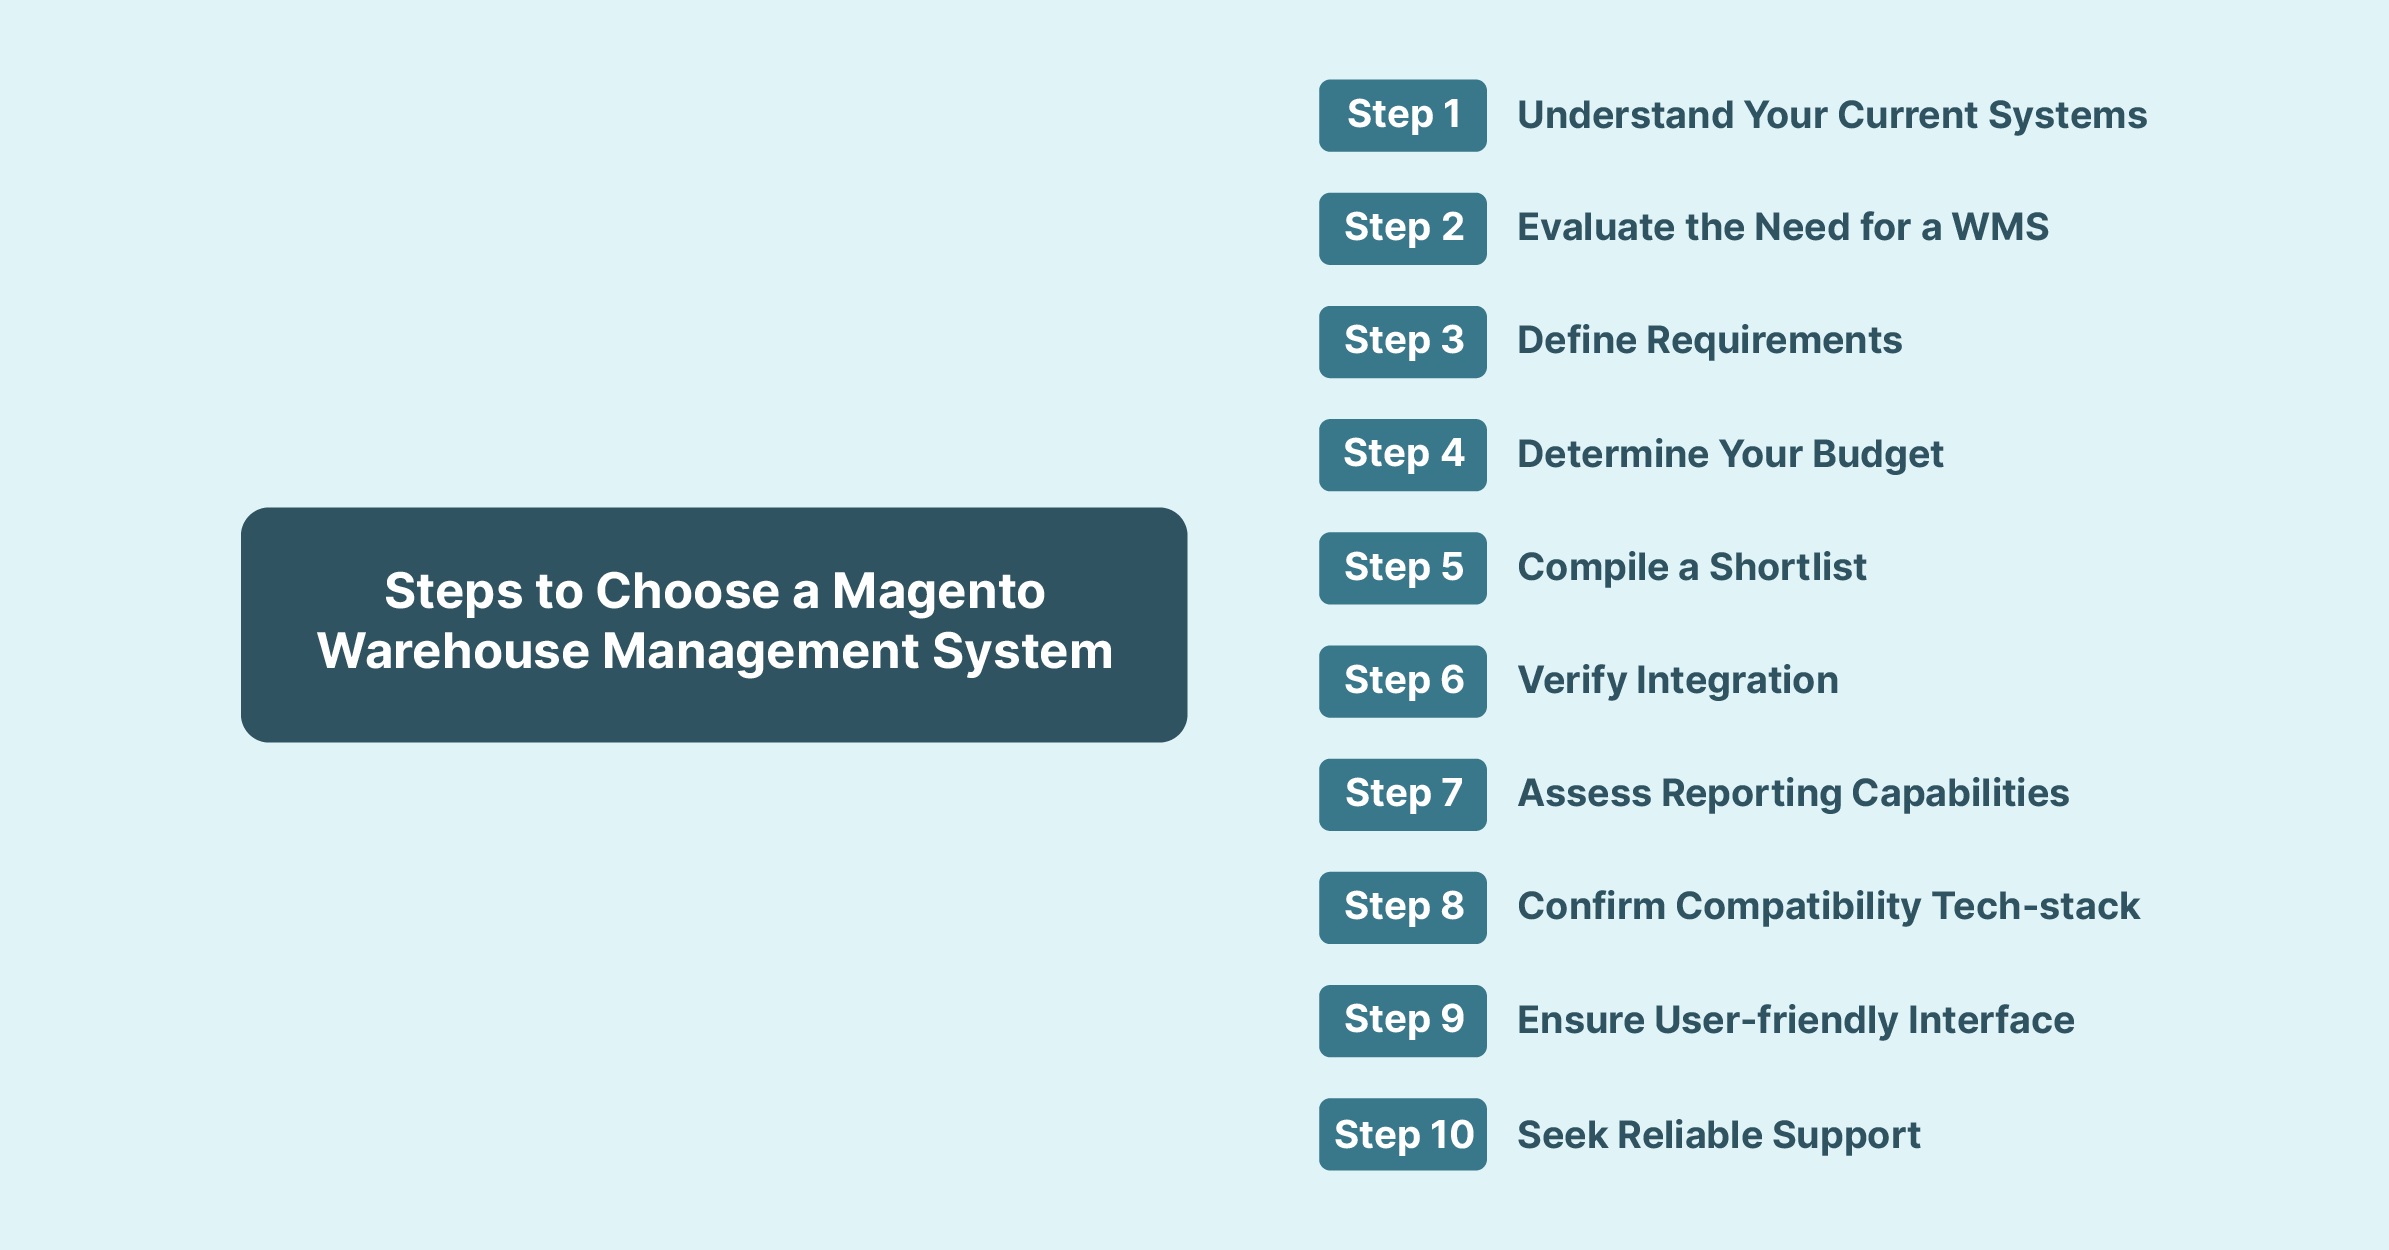 Step-by-step guide to selecting the right Magento Warehouse Management System